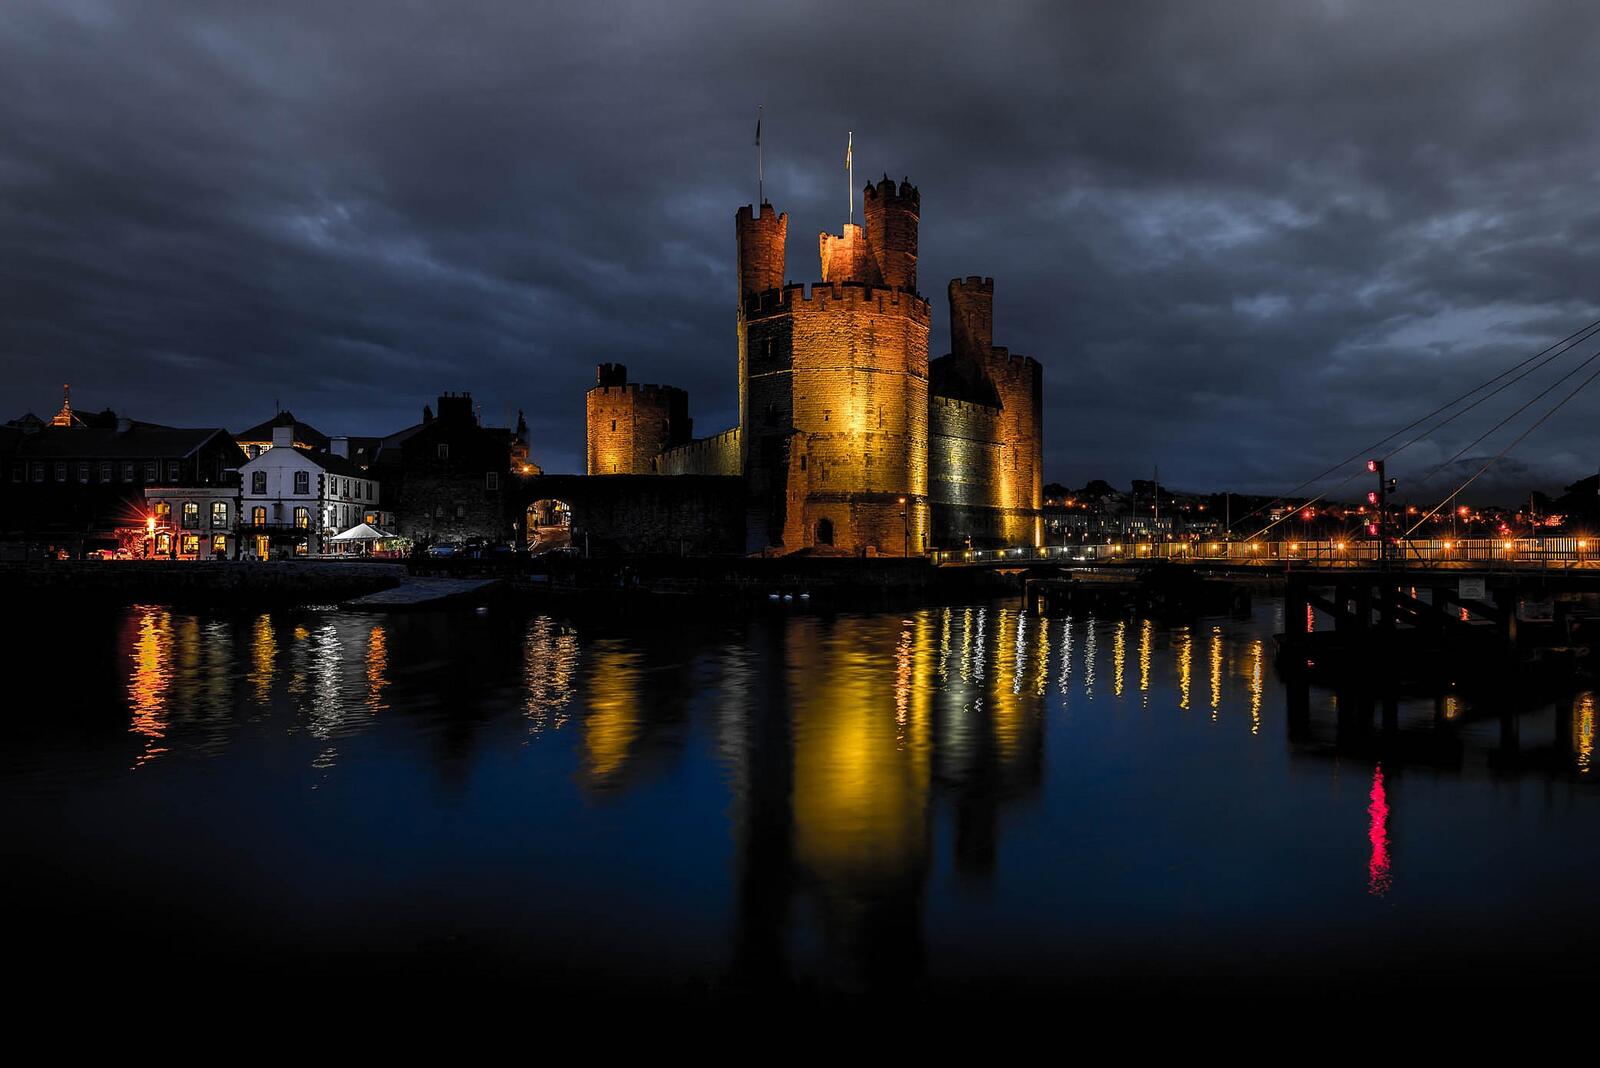 Wallpapers The Caernarfon castle a medieval castle located in the town of Carnarvon the County Gwynedd region of Wales on the desktop